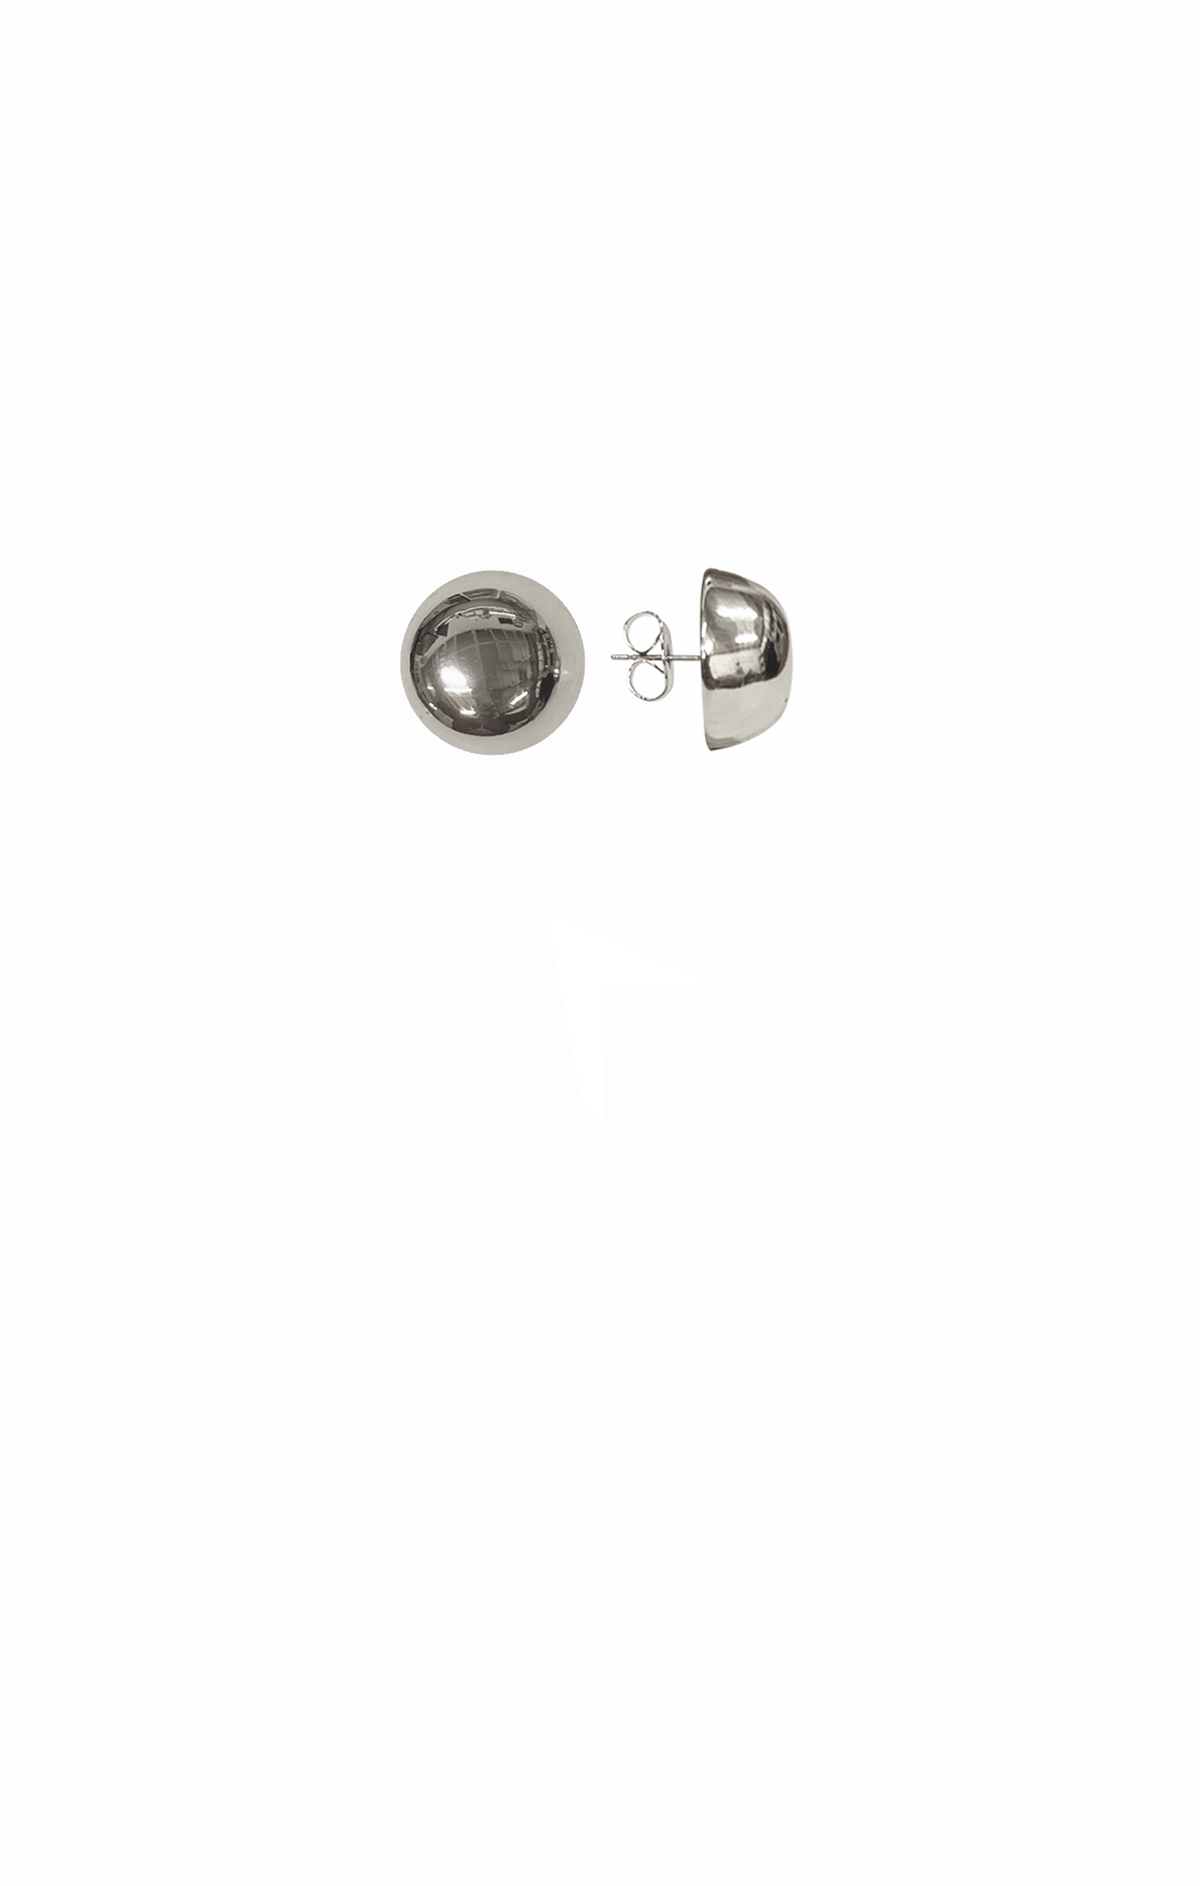 ACCESSORIES Earrings OS / SILVER POLISHED DOME STUD EARRING